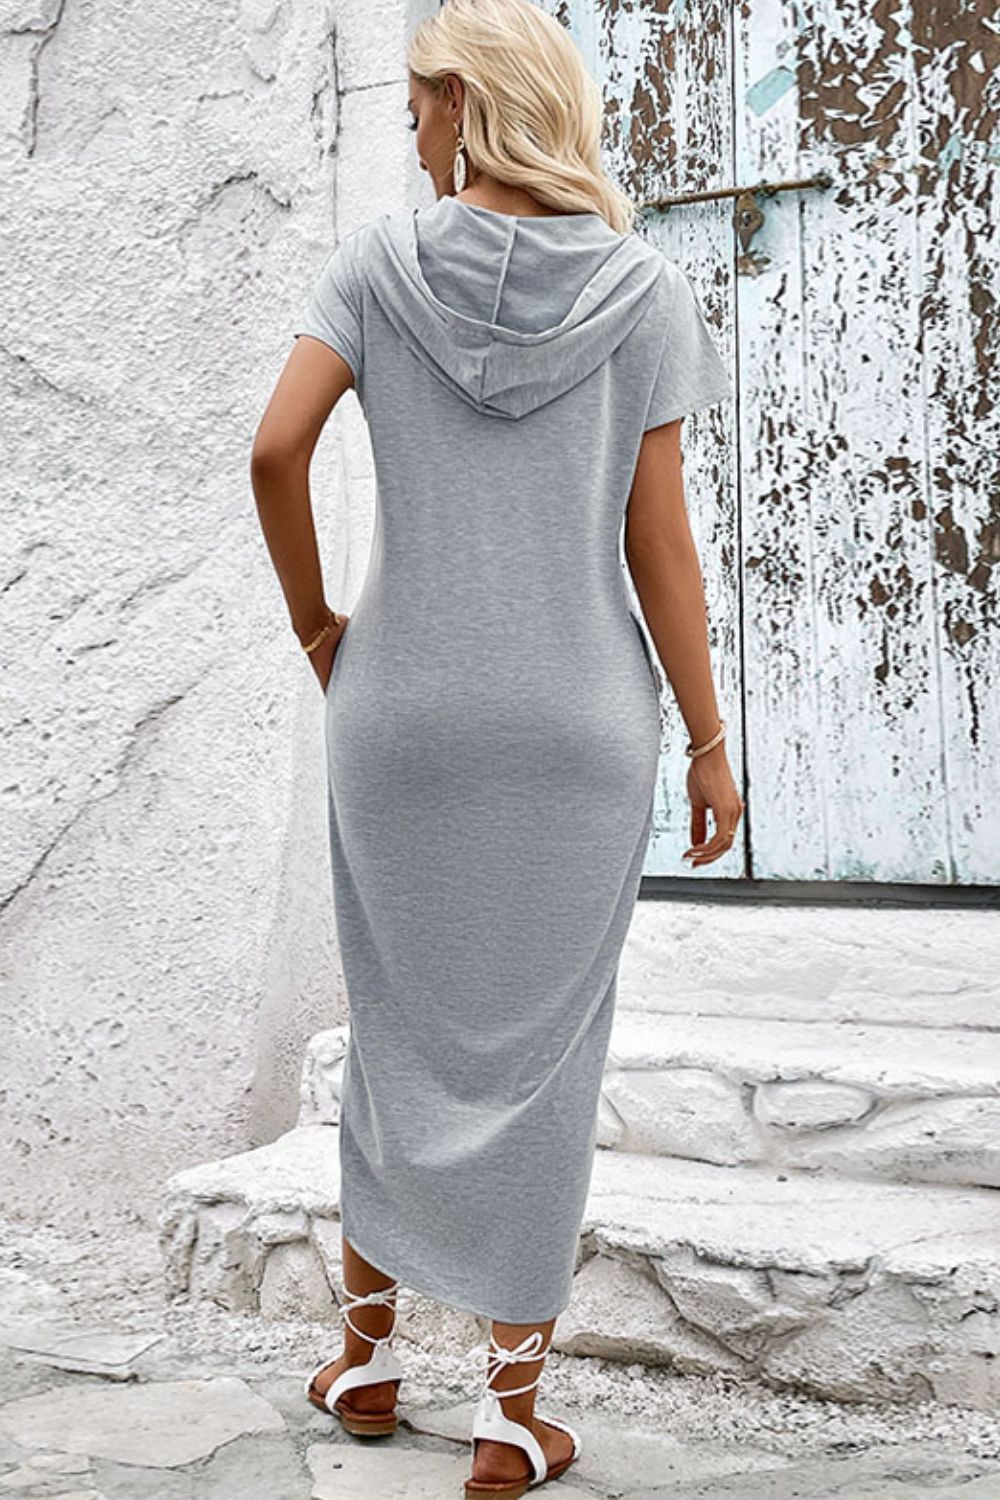 Short Sleeve Front Slit Hooded Dress- ONLINE ONLY 2-10 DAY SHIPPING